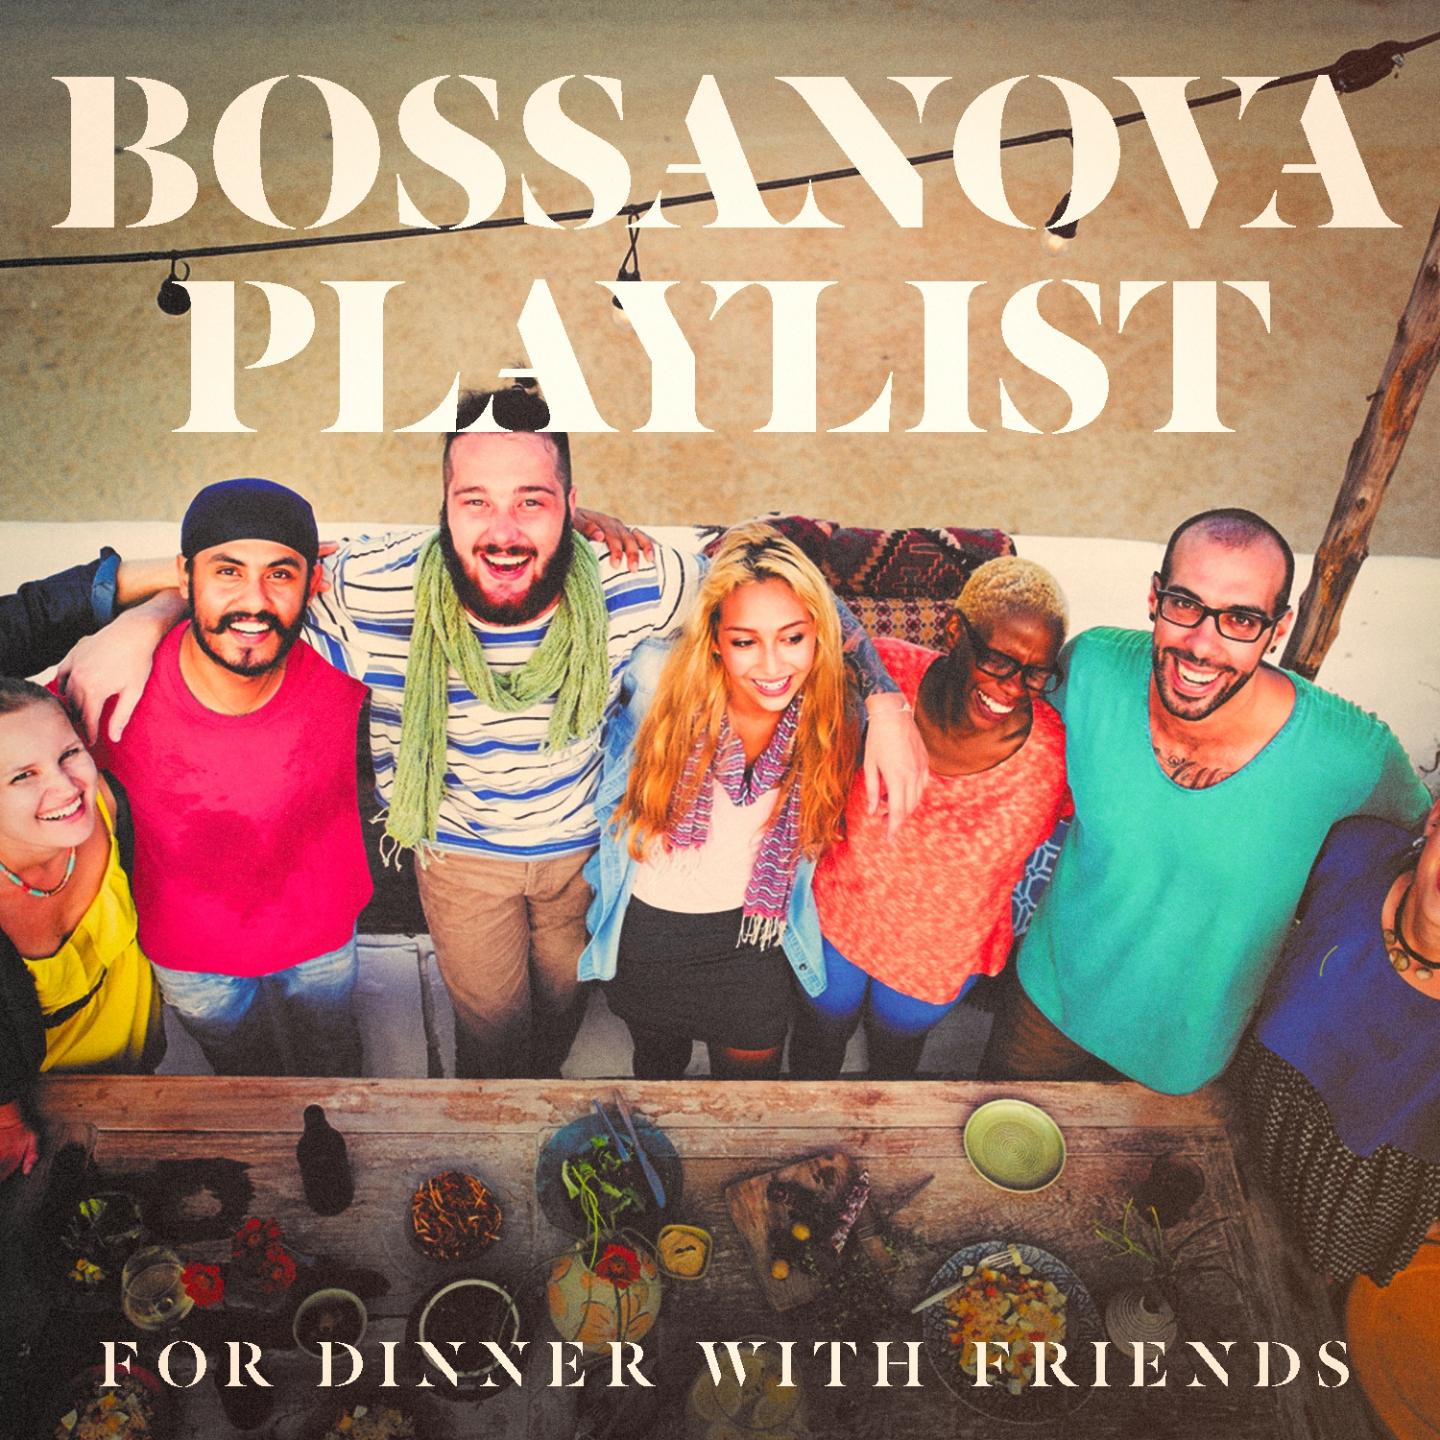 Bossanova Playlist for Dinner with Friends